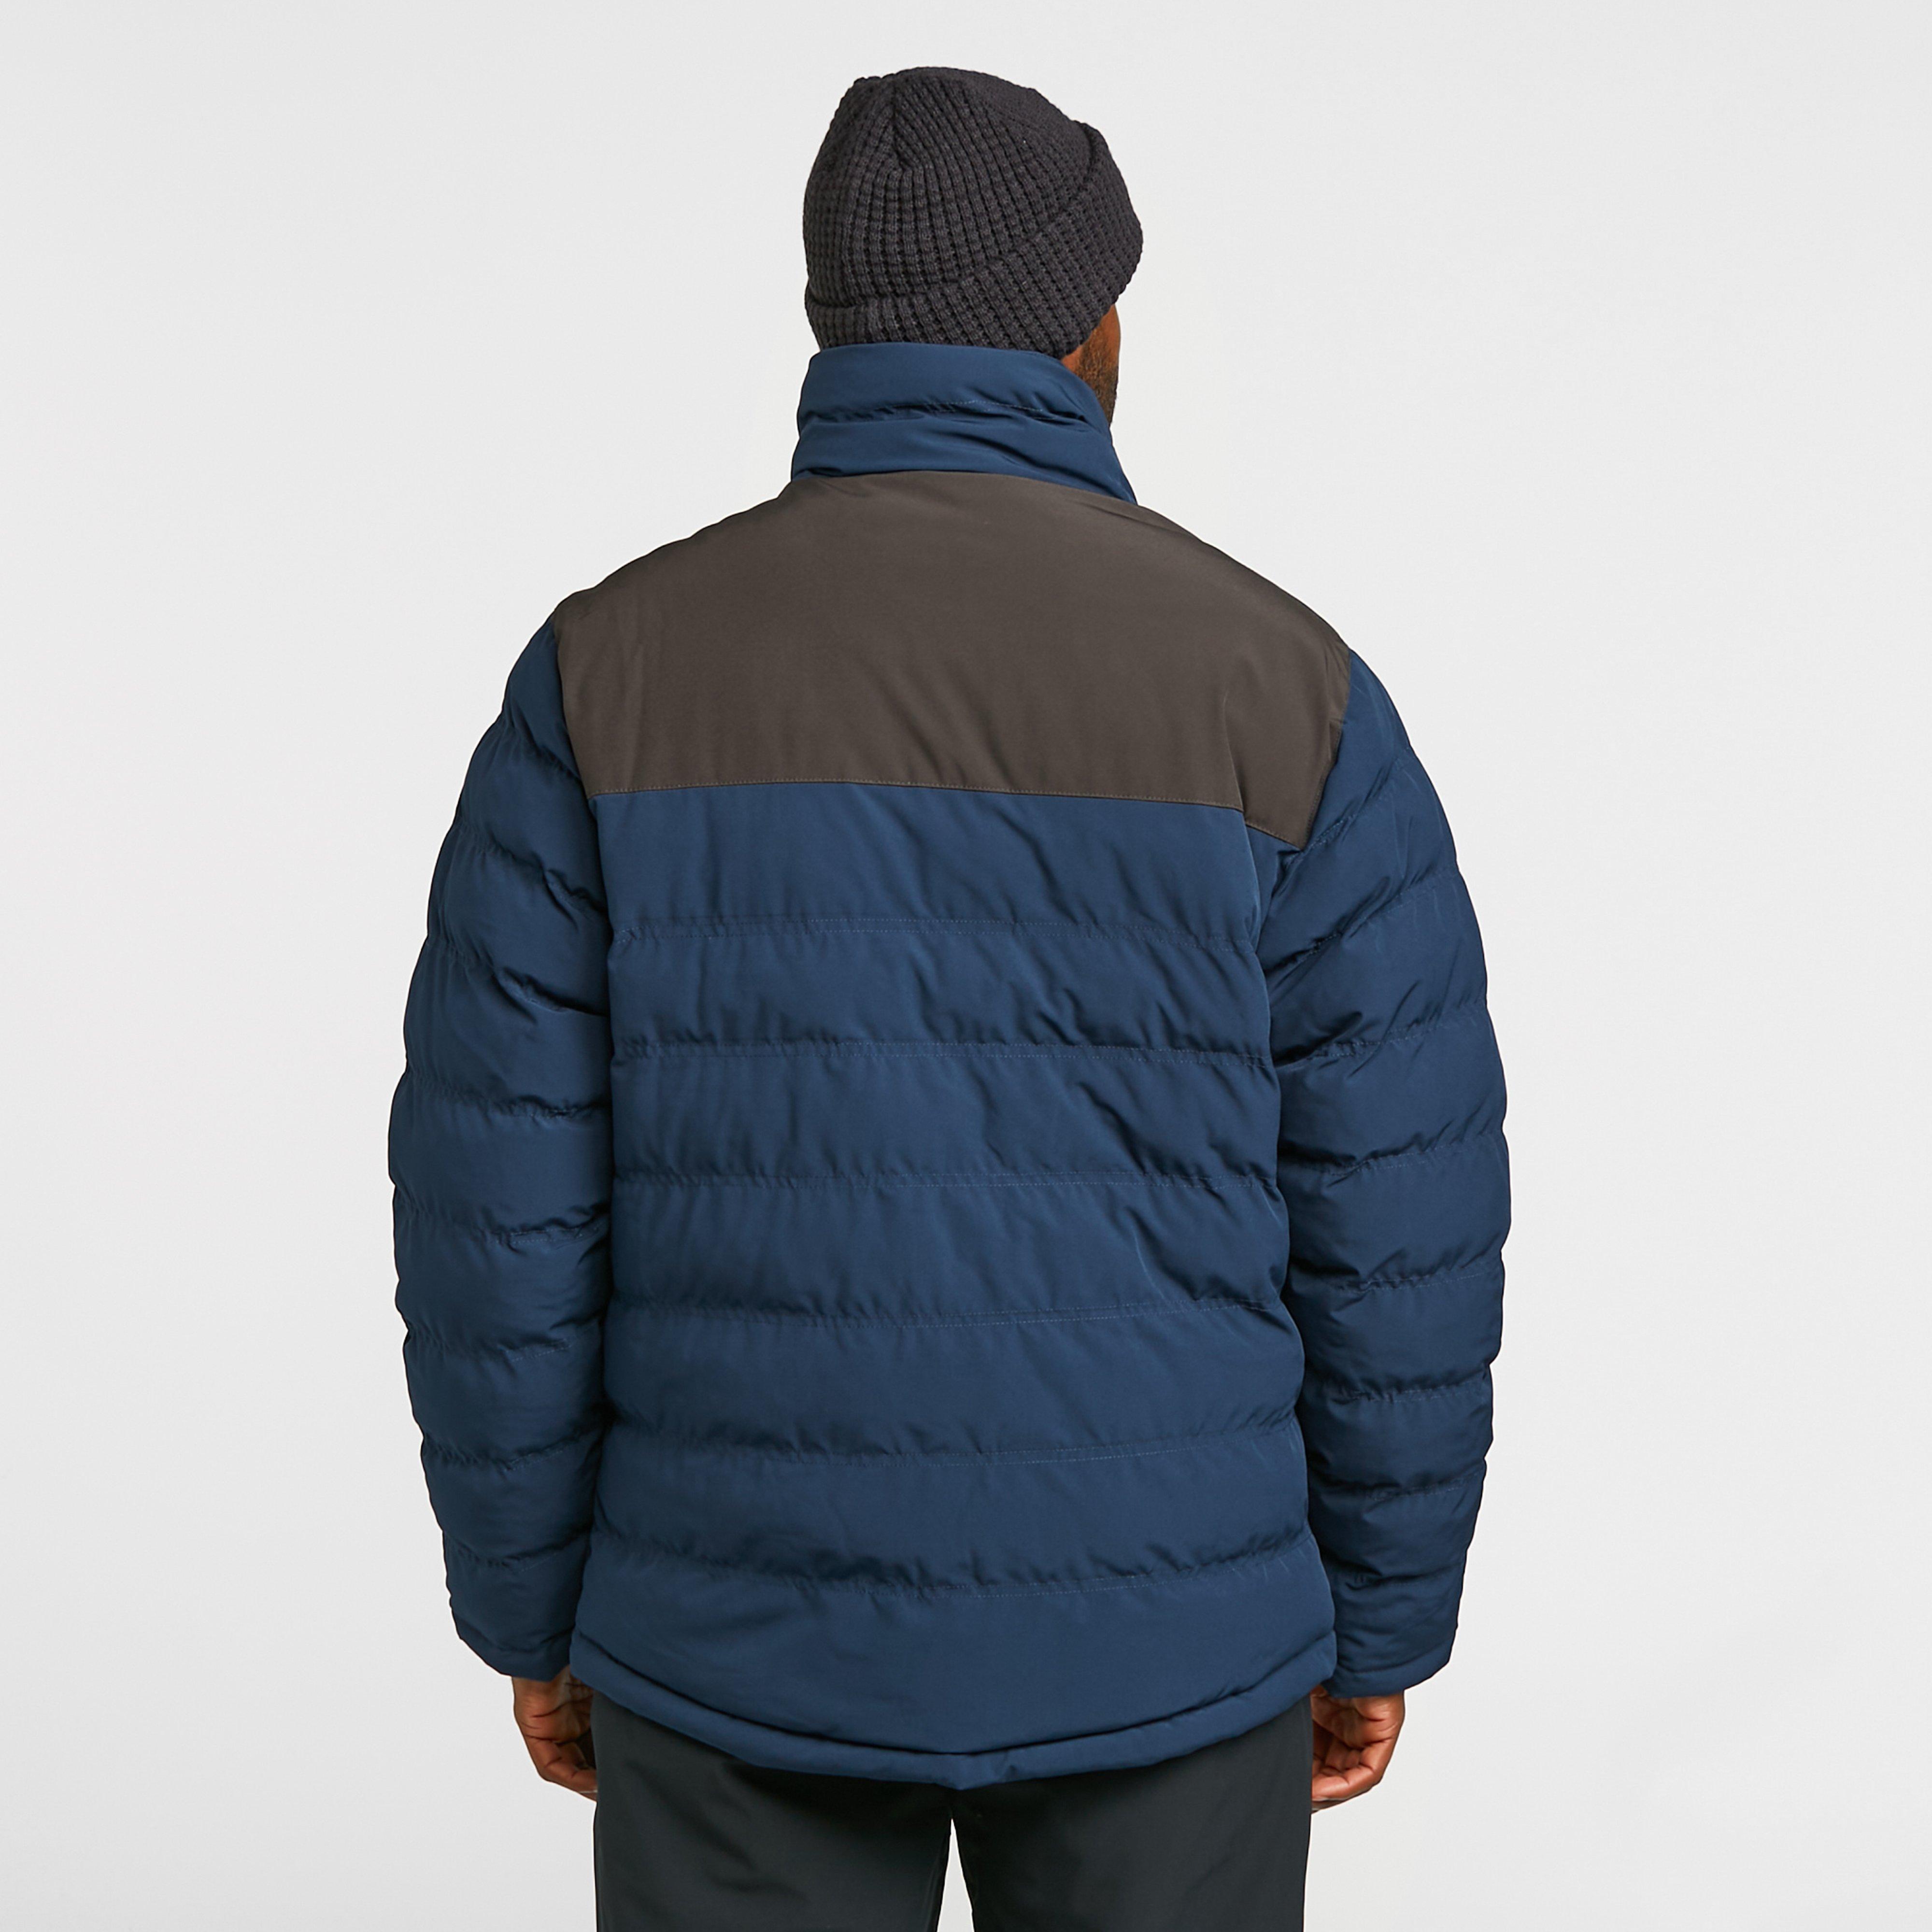 The Edge Men's Banff Insulated Snow Jacket Review